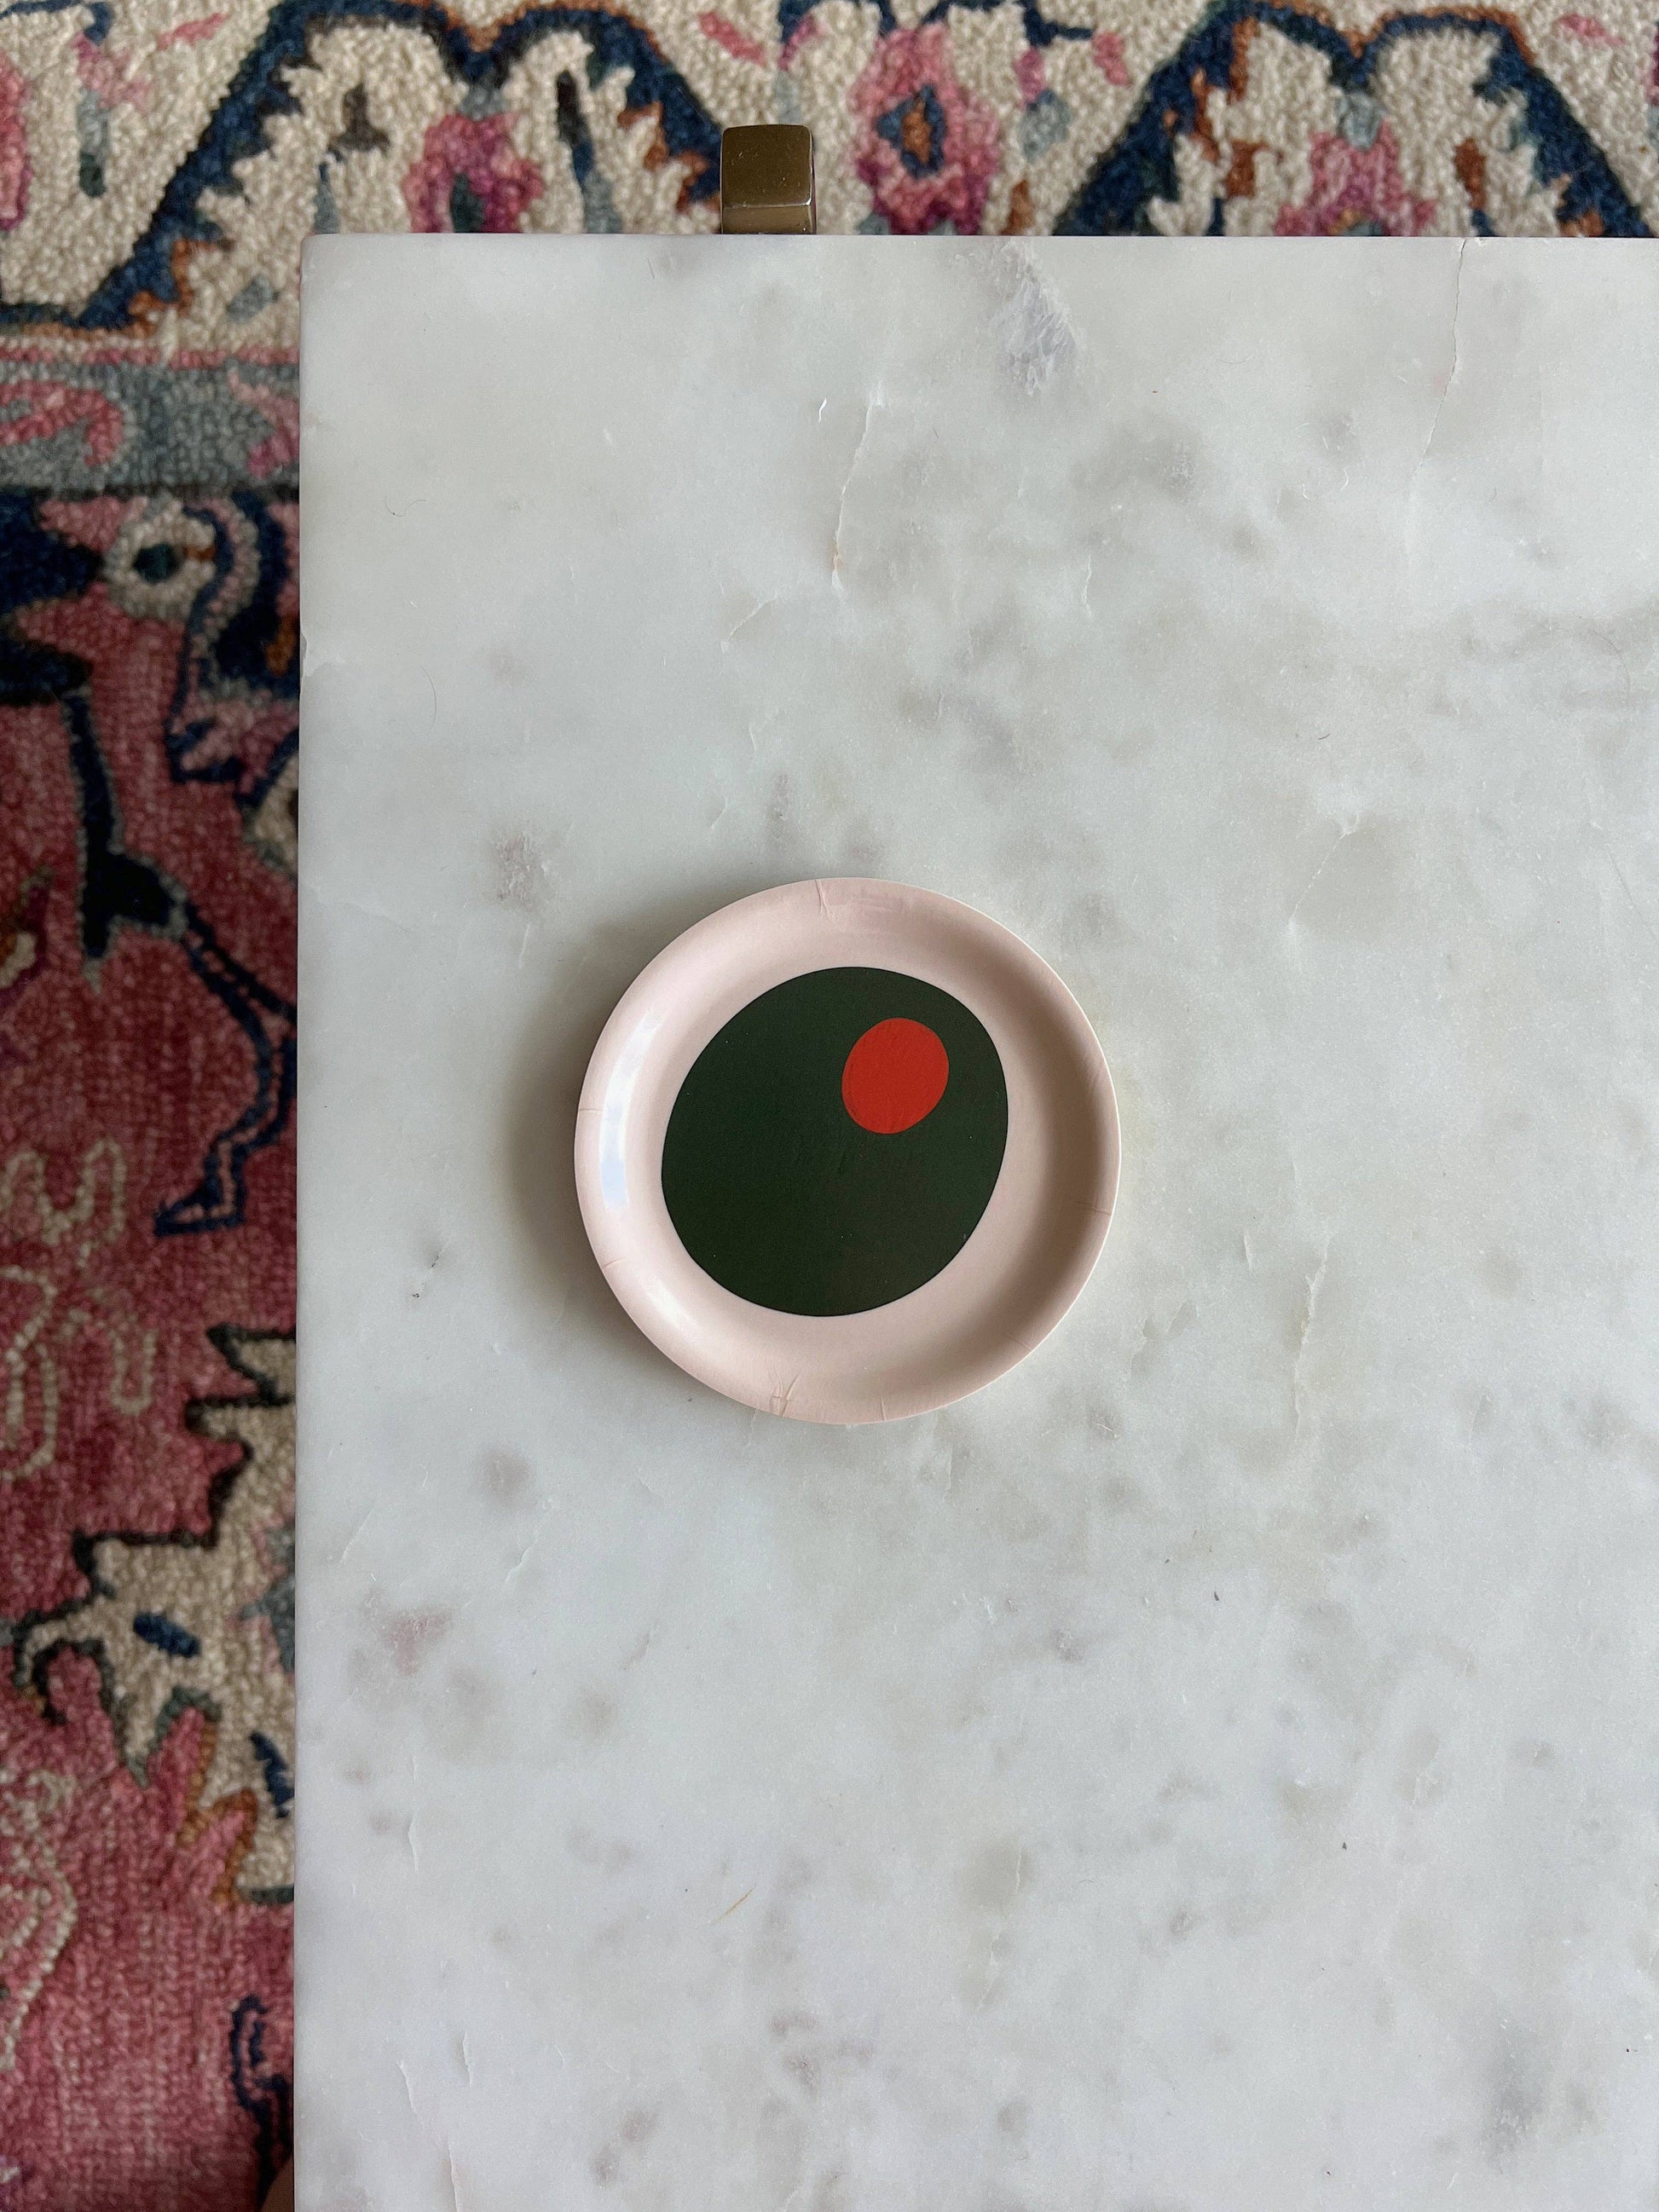 Small trinket dish with a pimento olive illlustration on it